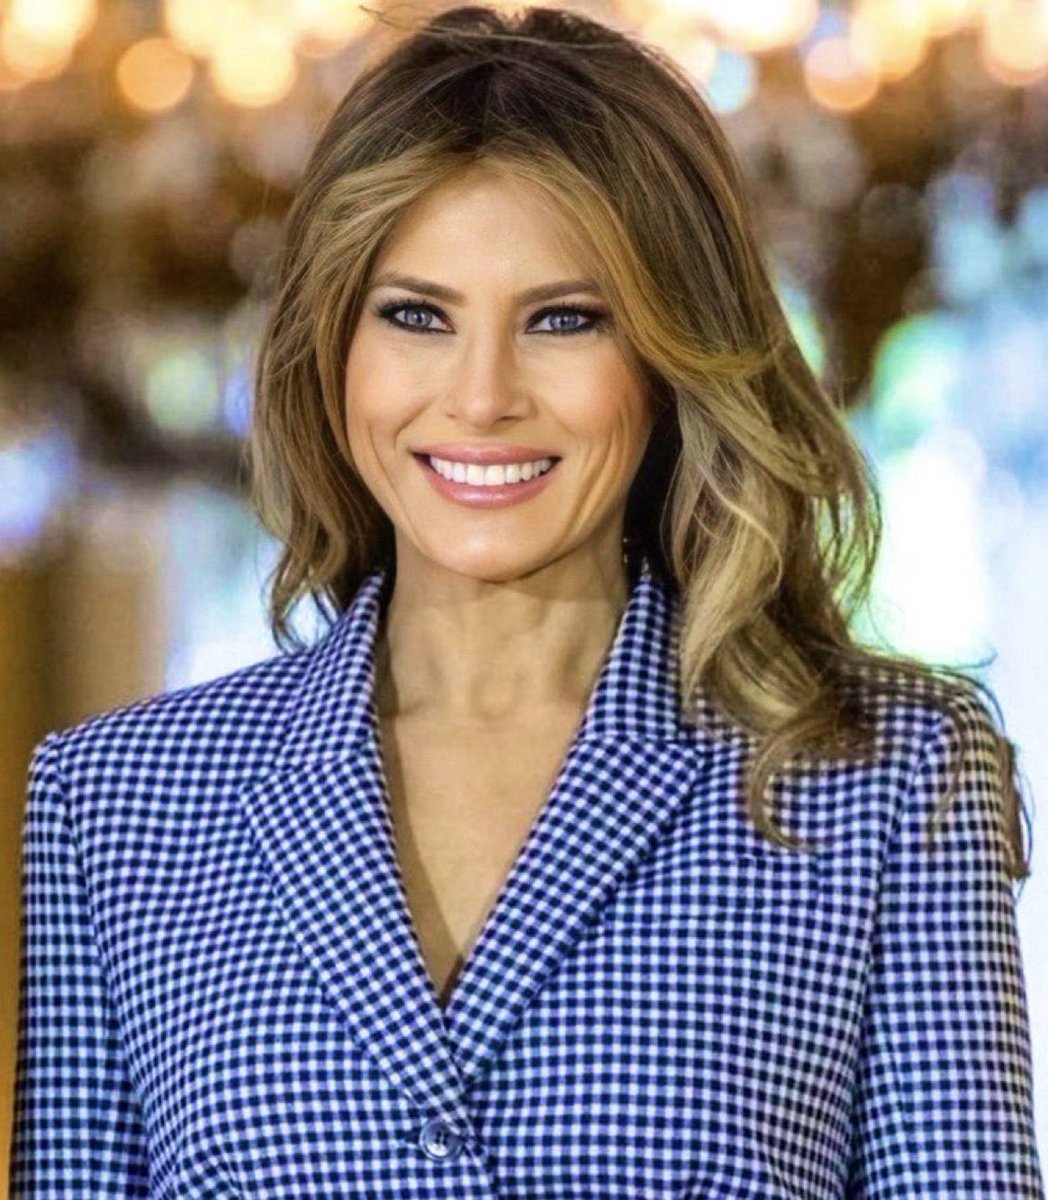 Do you agree that Melania Trump was hands down a better FLOTUS than Jill Biden and Michelle Obama? YES or NO? #MelaniaMonday